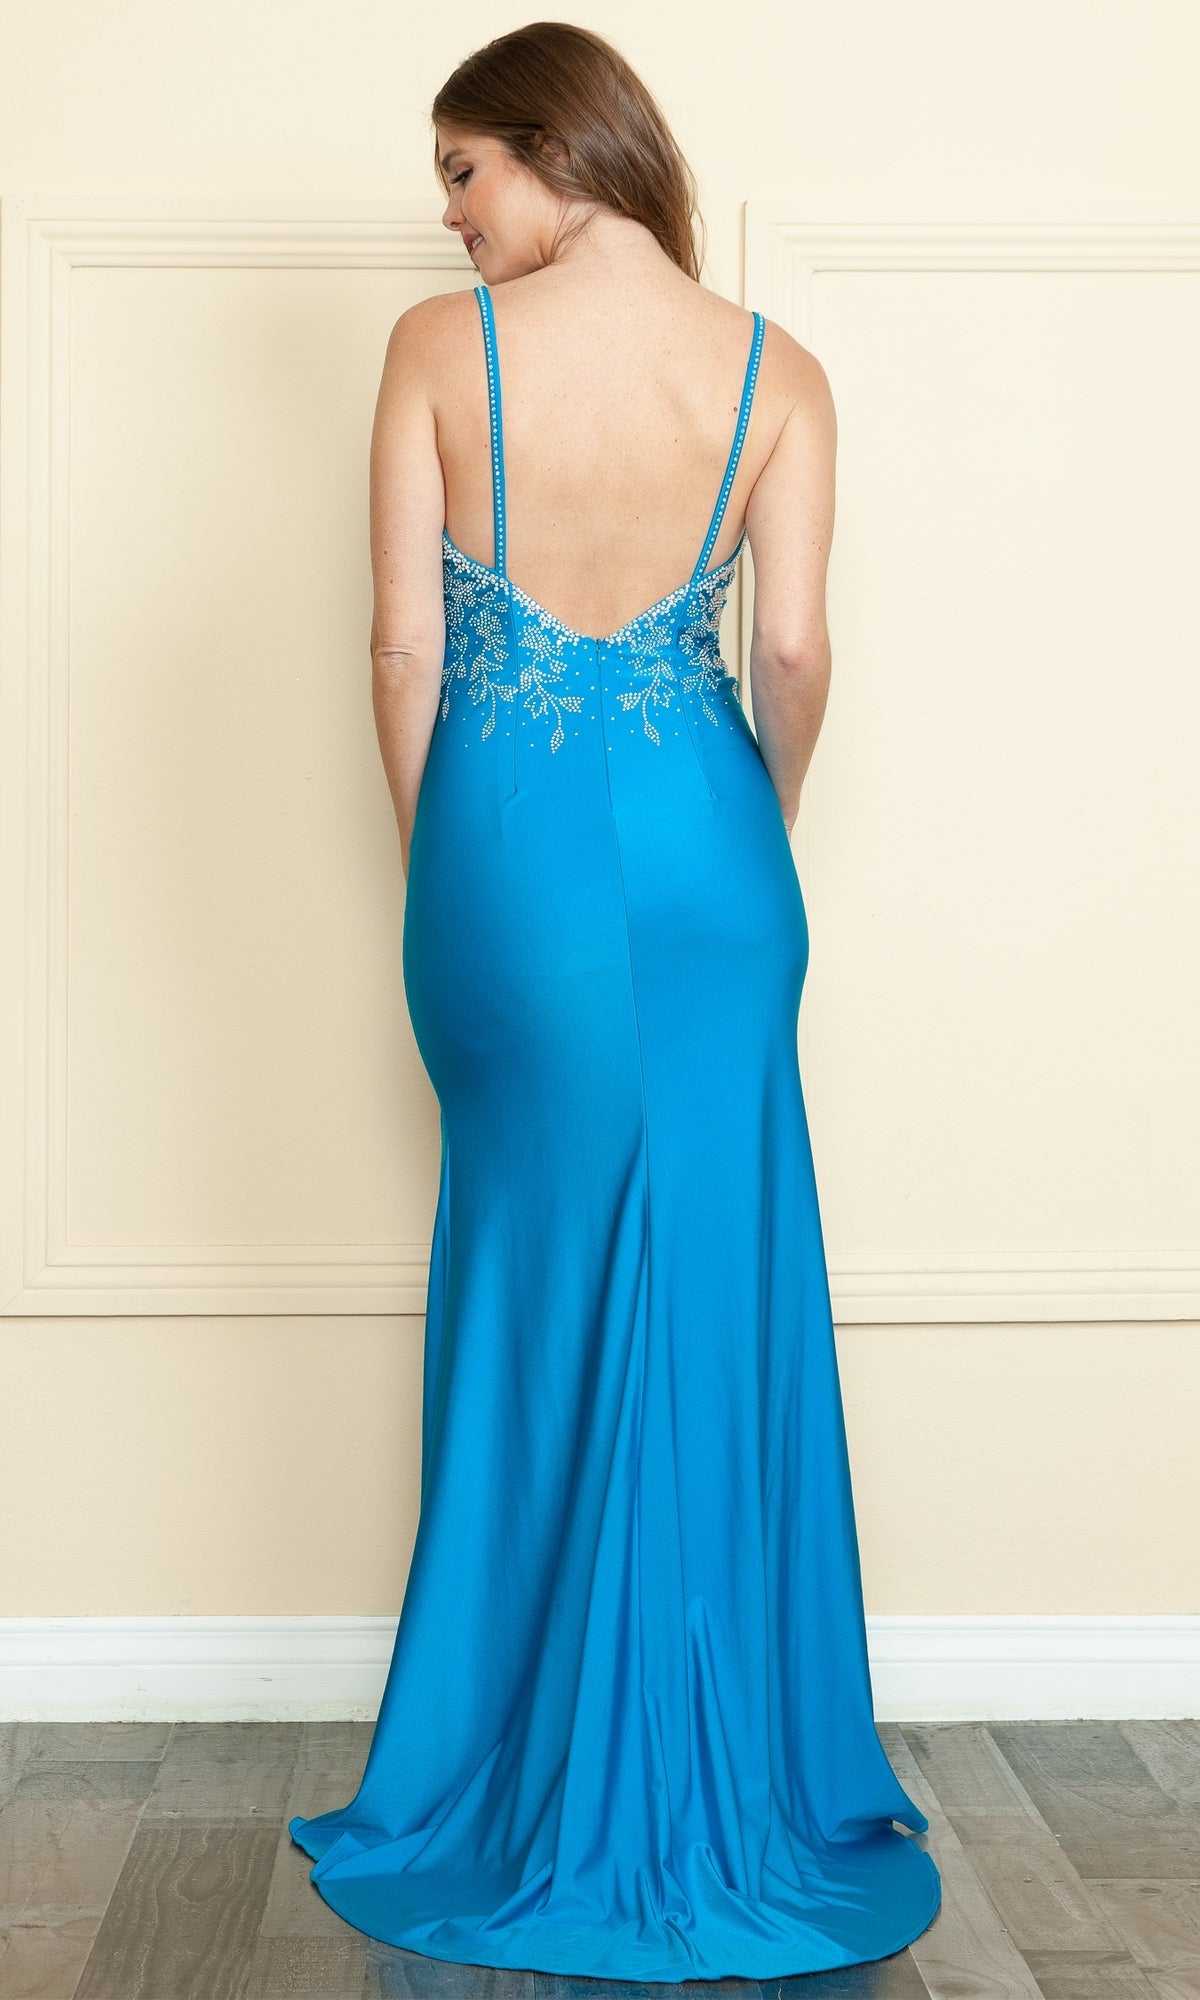 Long Prom Dress 9120 by Poly USA